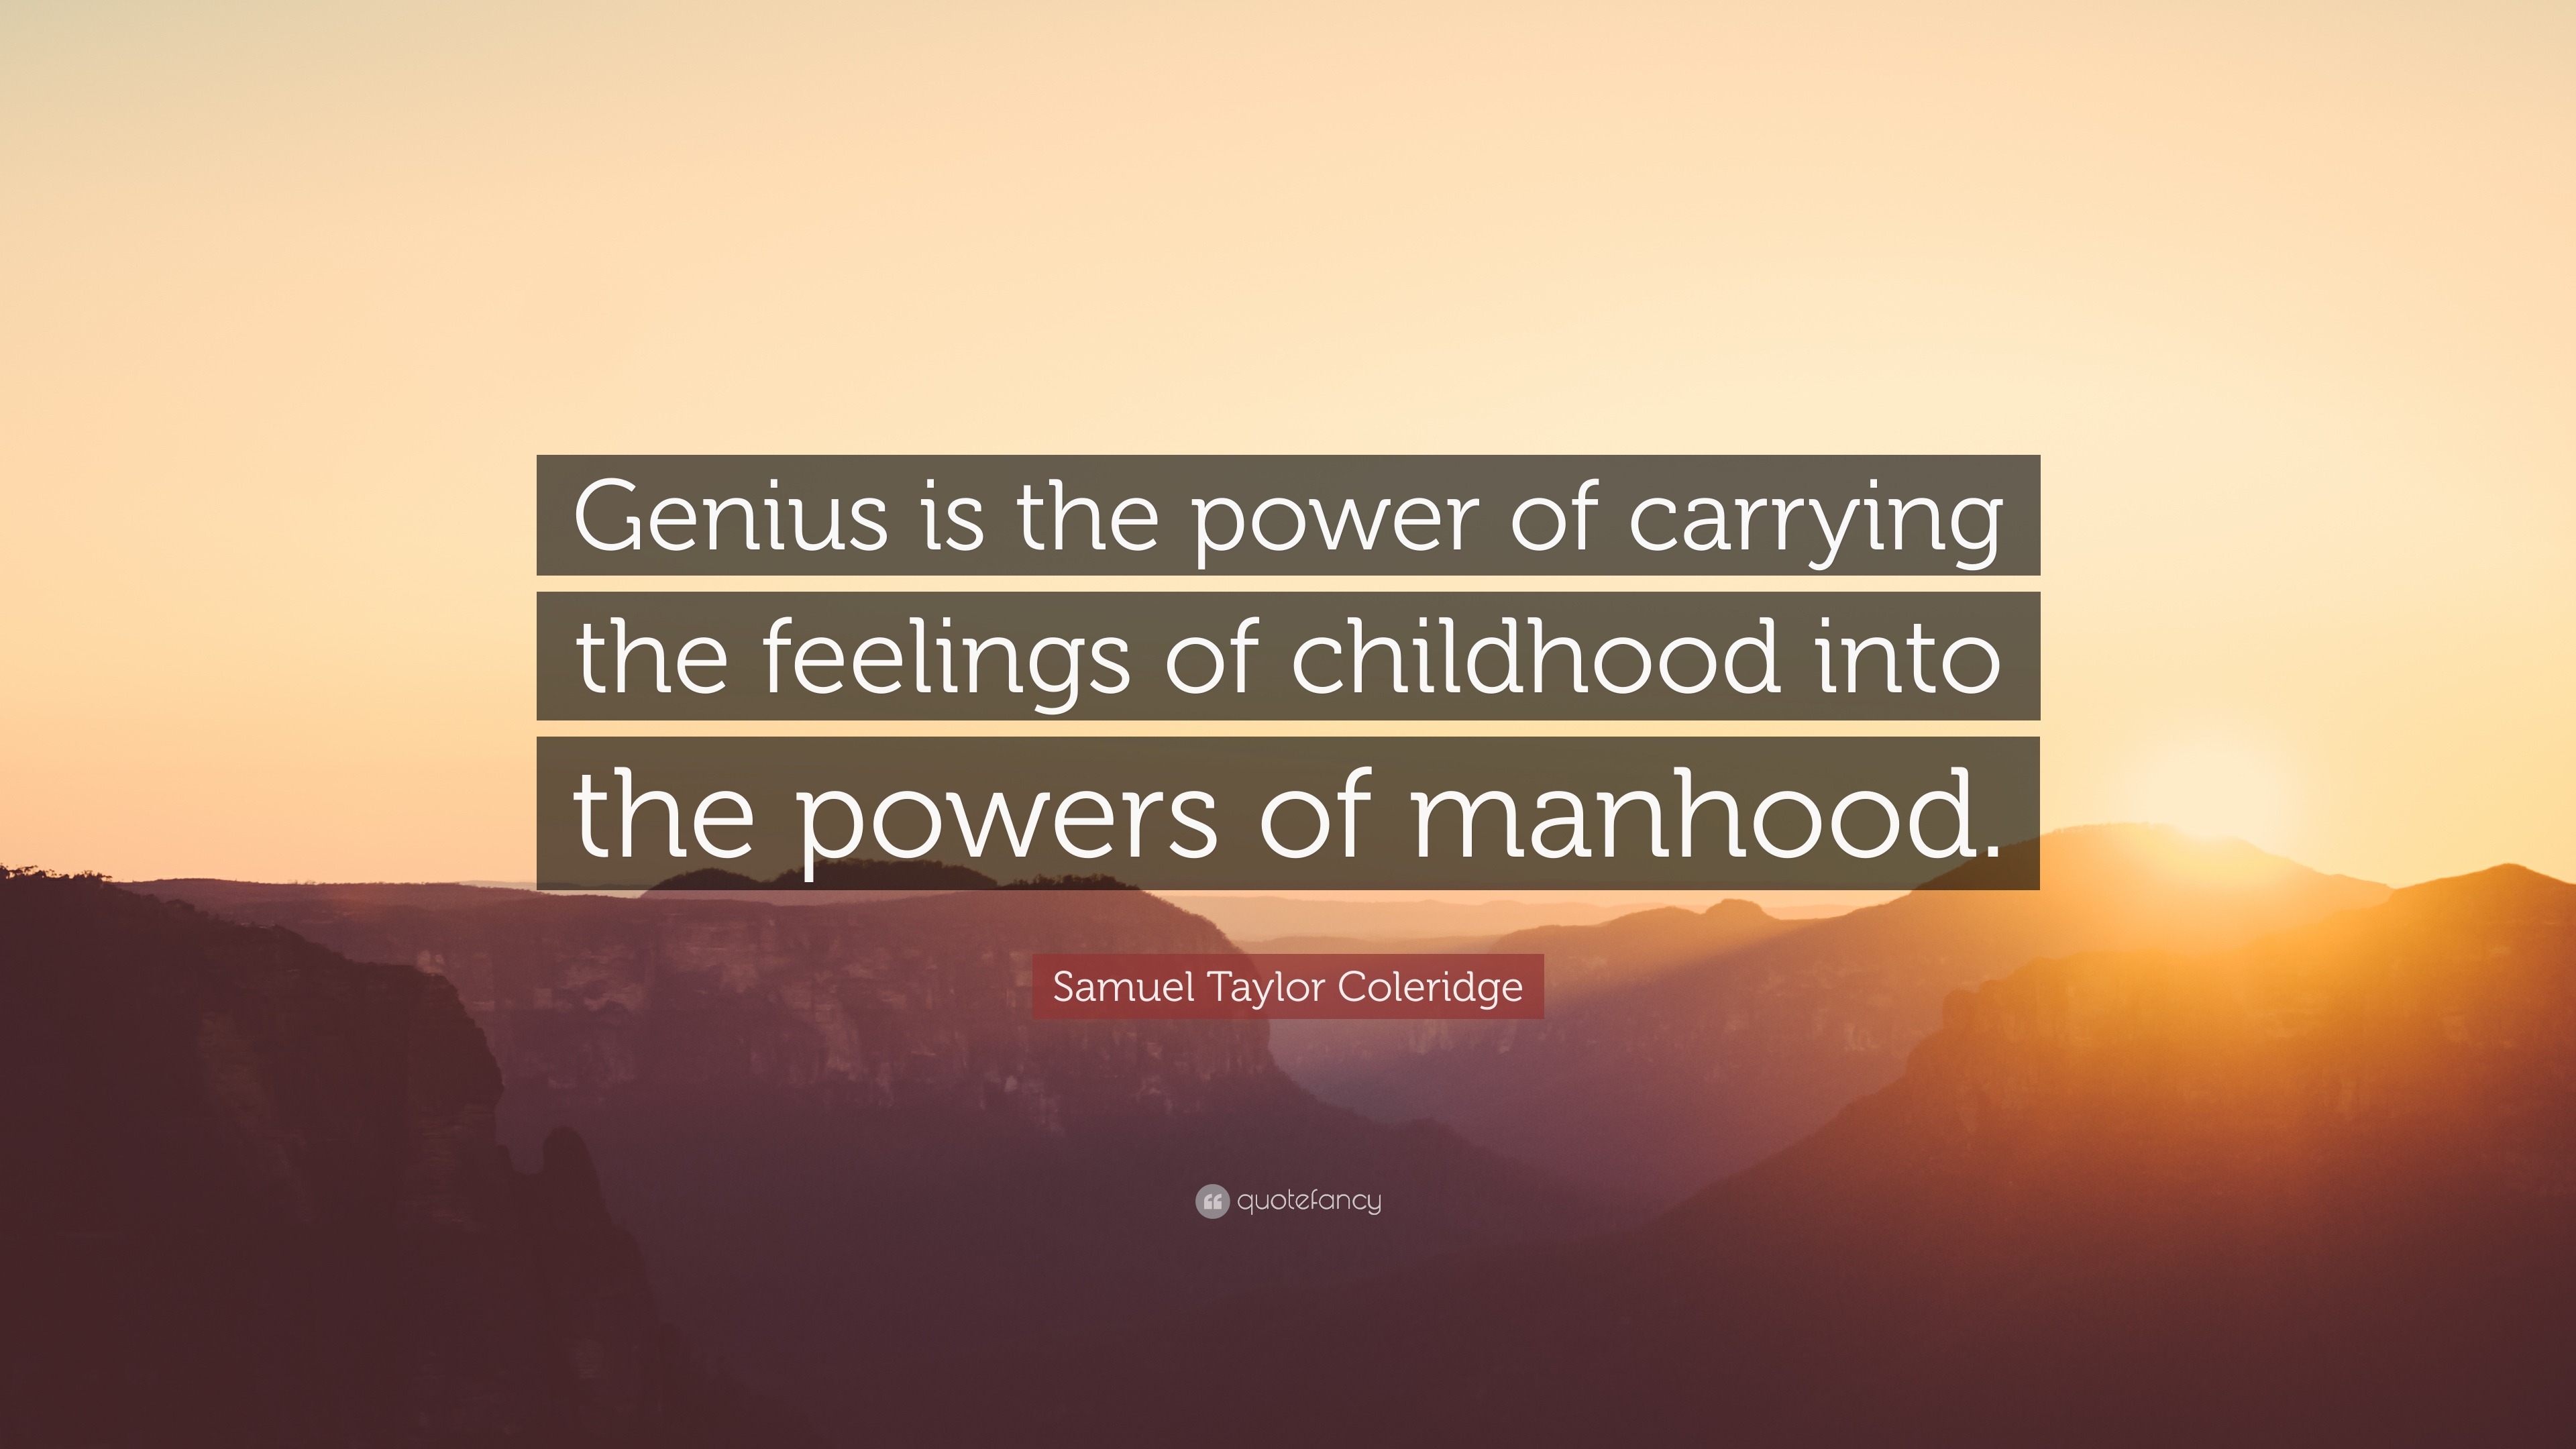 Samuel Taylor Coleridge Quote: “Genius is the power of carrying the feelings of ...3840 x 2160